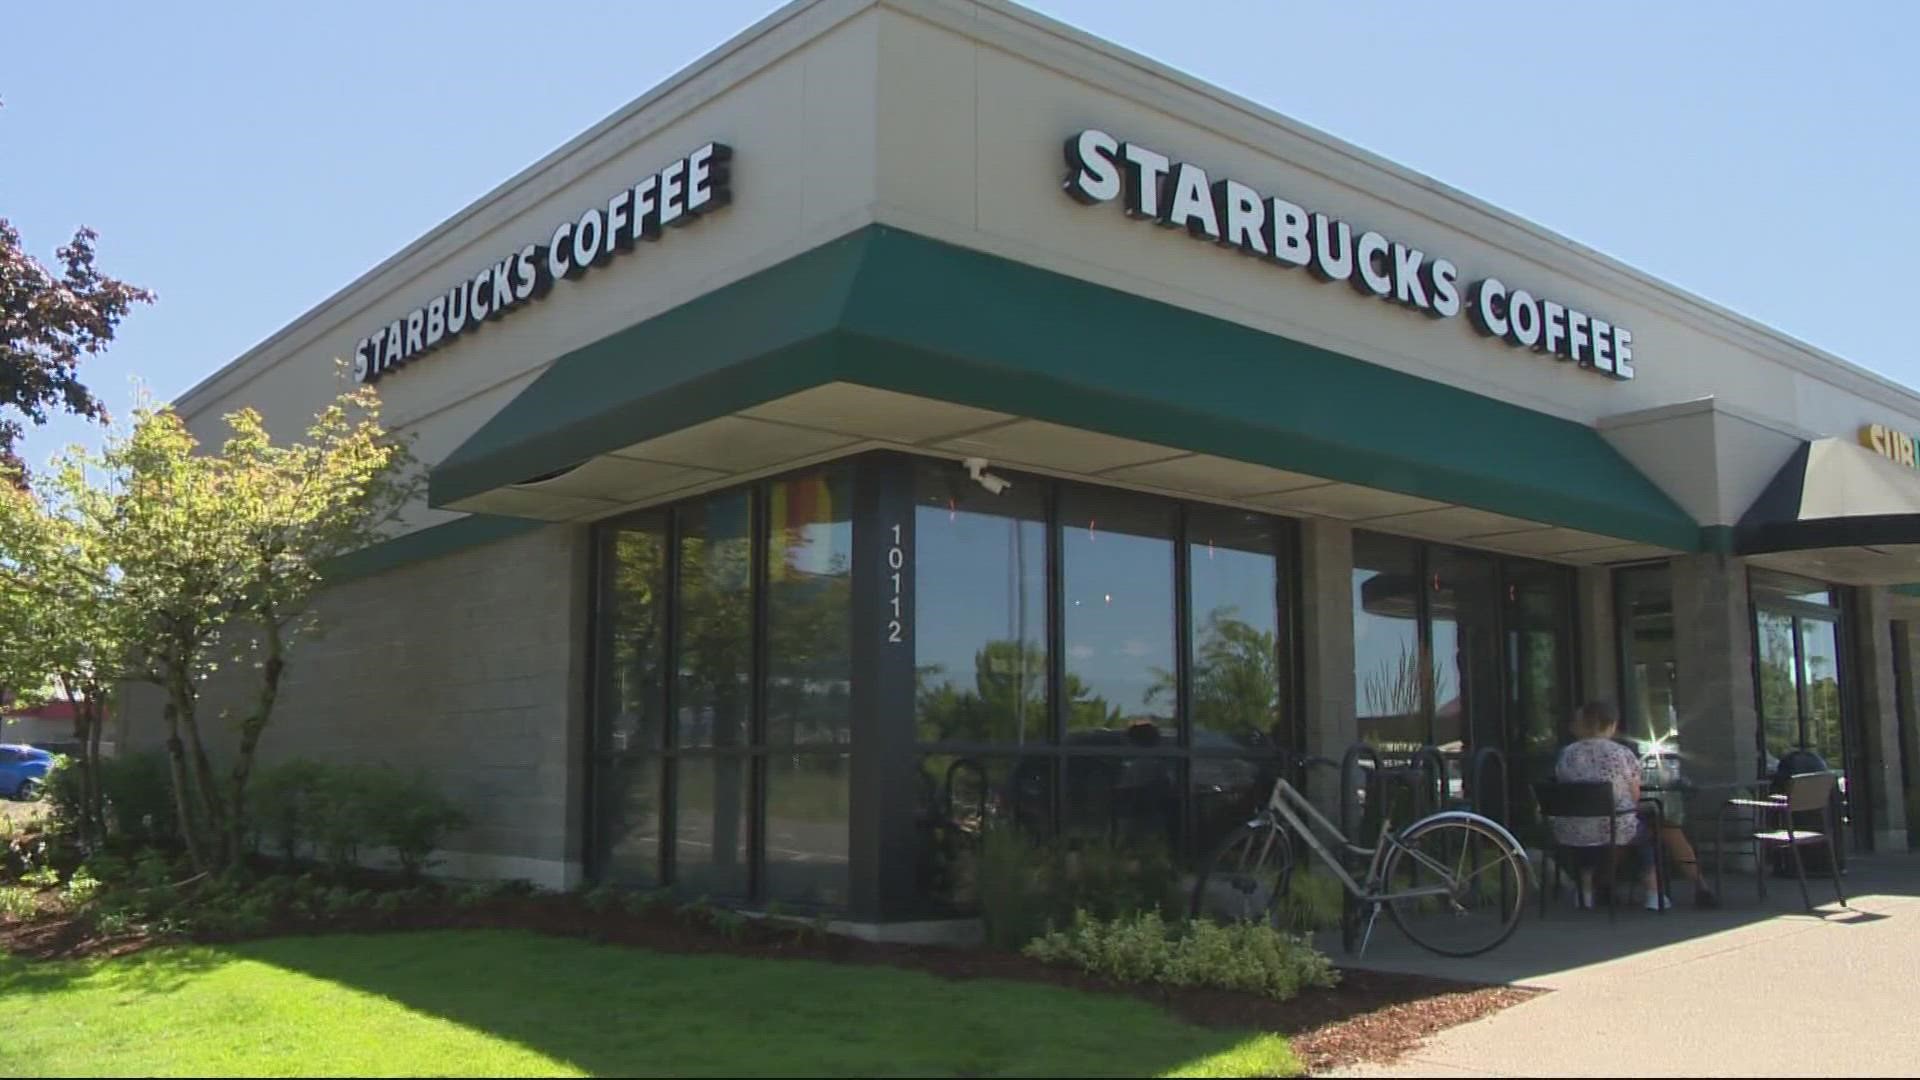 Stores downtown and in the Gateway area are slated to close. A Starbucks rep said that safety issues are a big part of why they chose these locations.